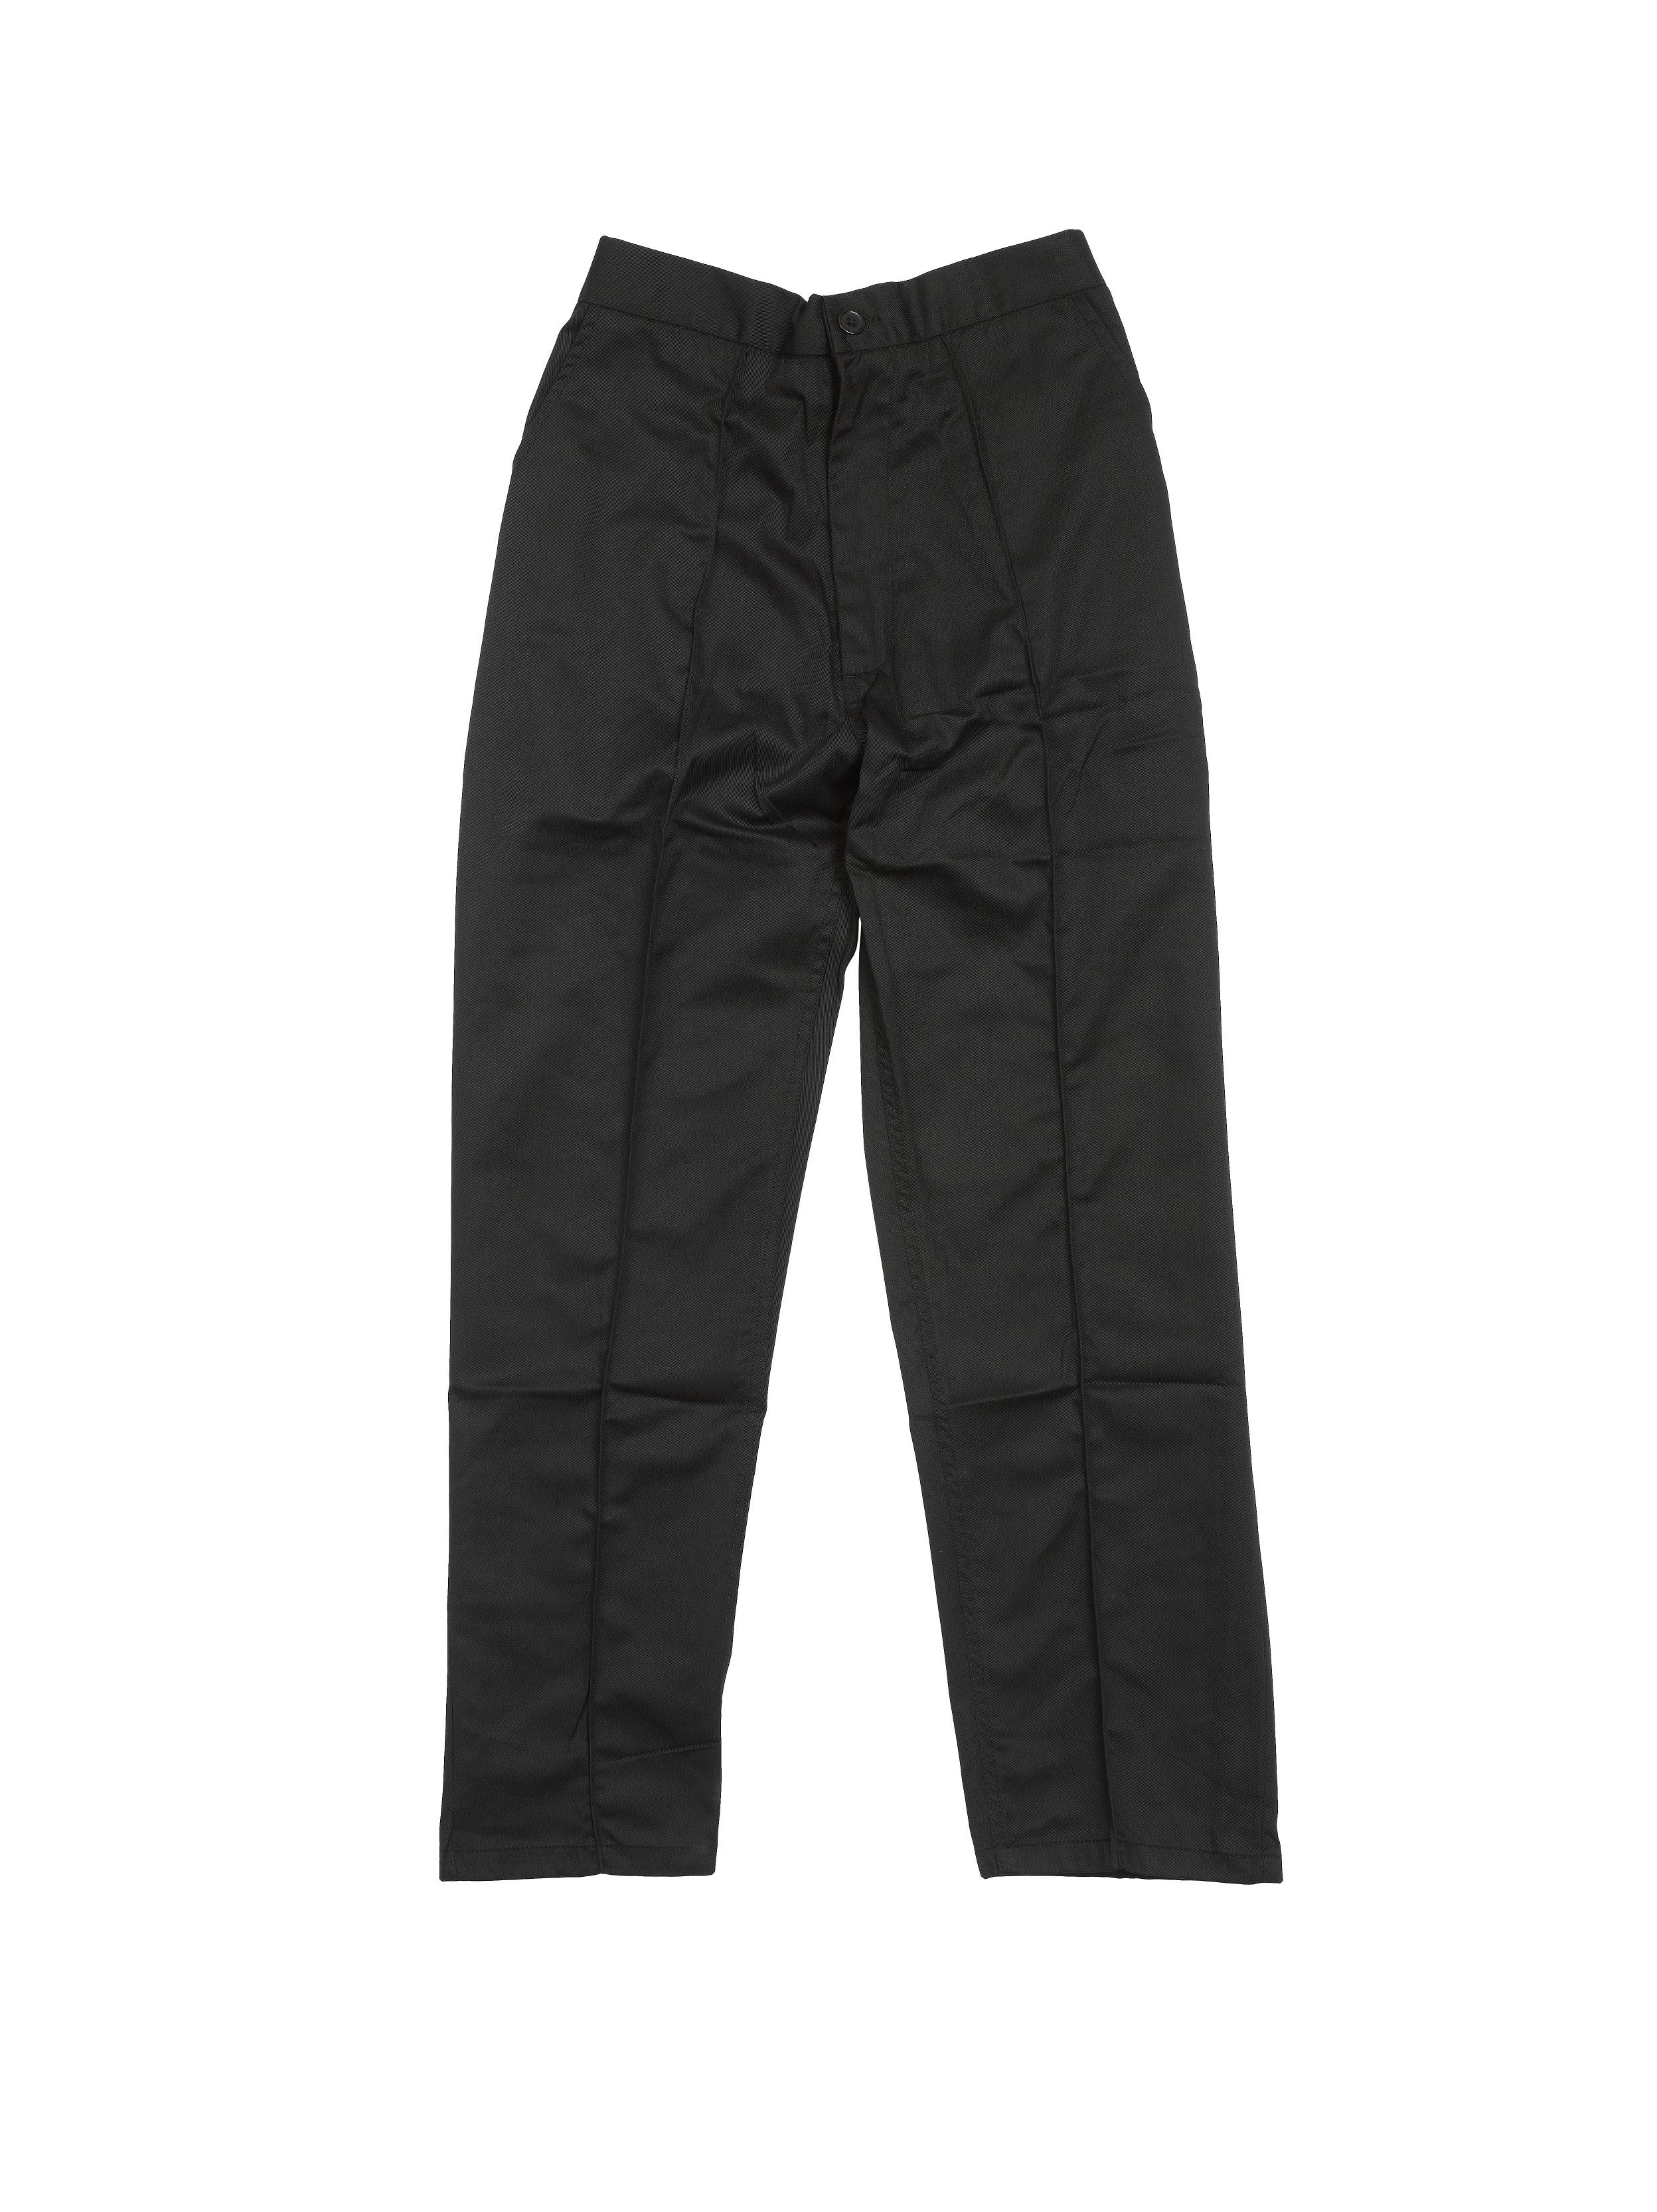 LADIES TROUSER - SEWN IN SEAM | Warrior Protects